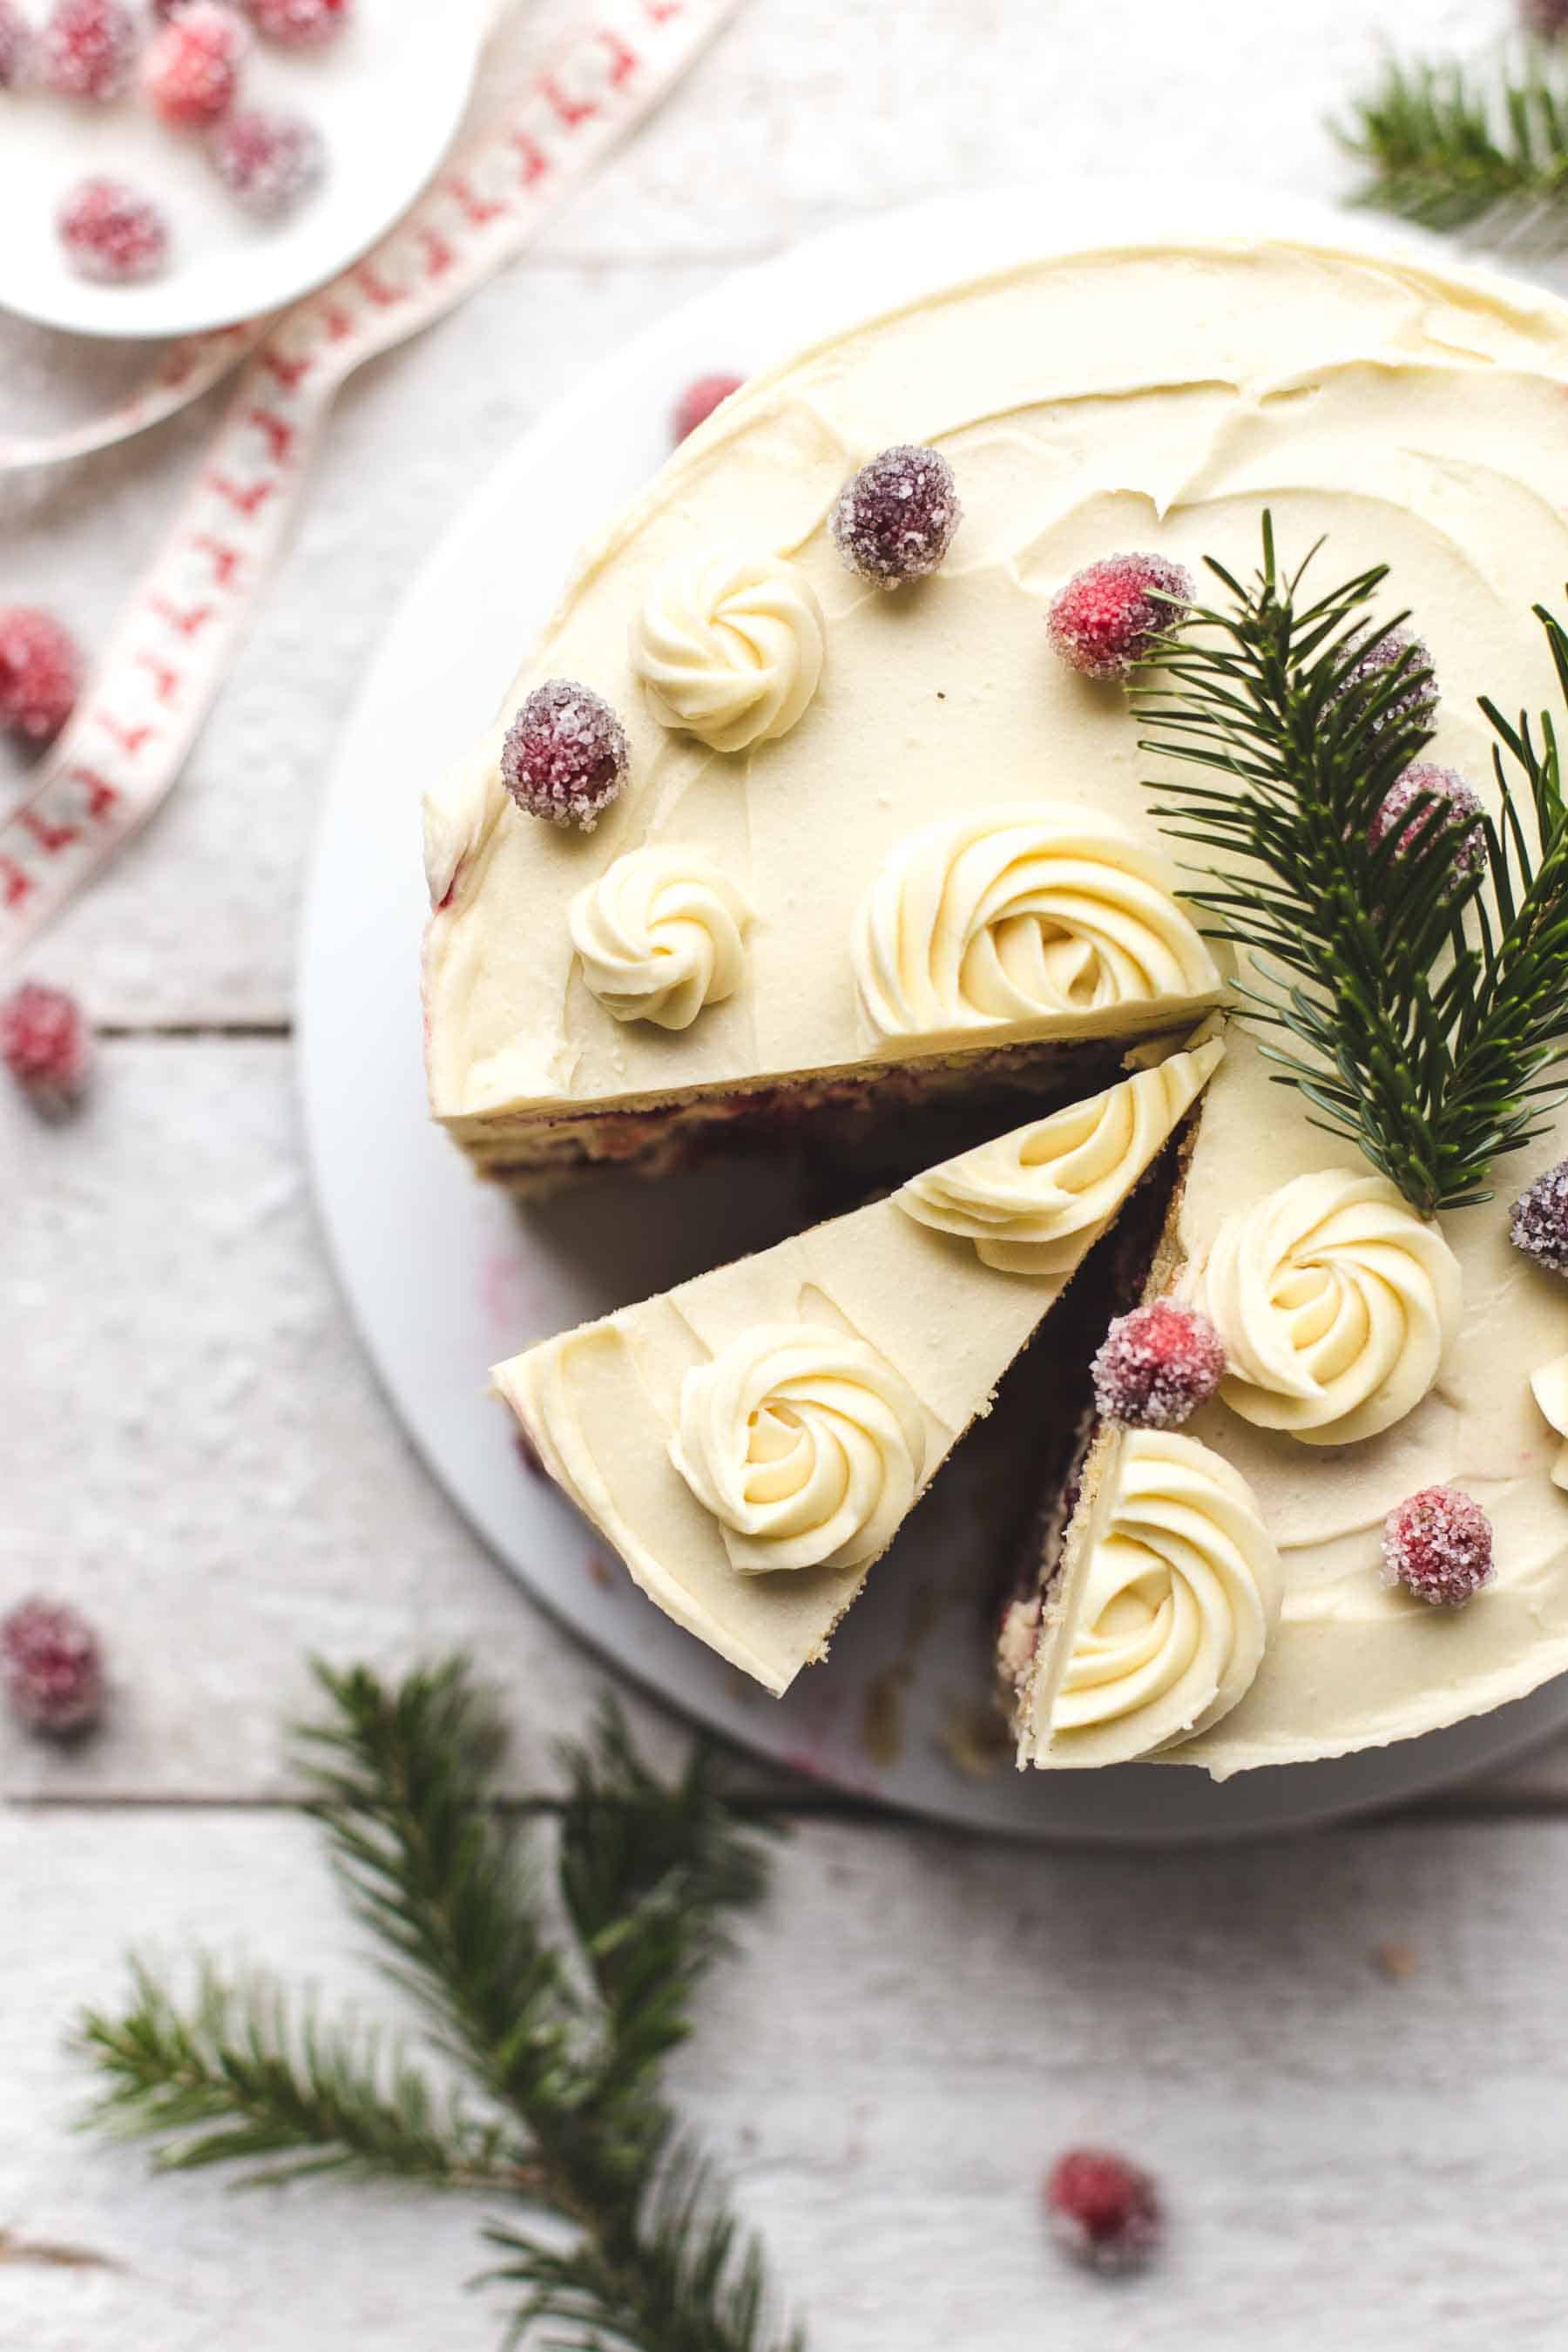 Cut Cranberry Orange Cake with White Chocolate Frosting from above